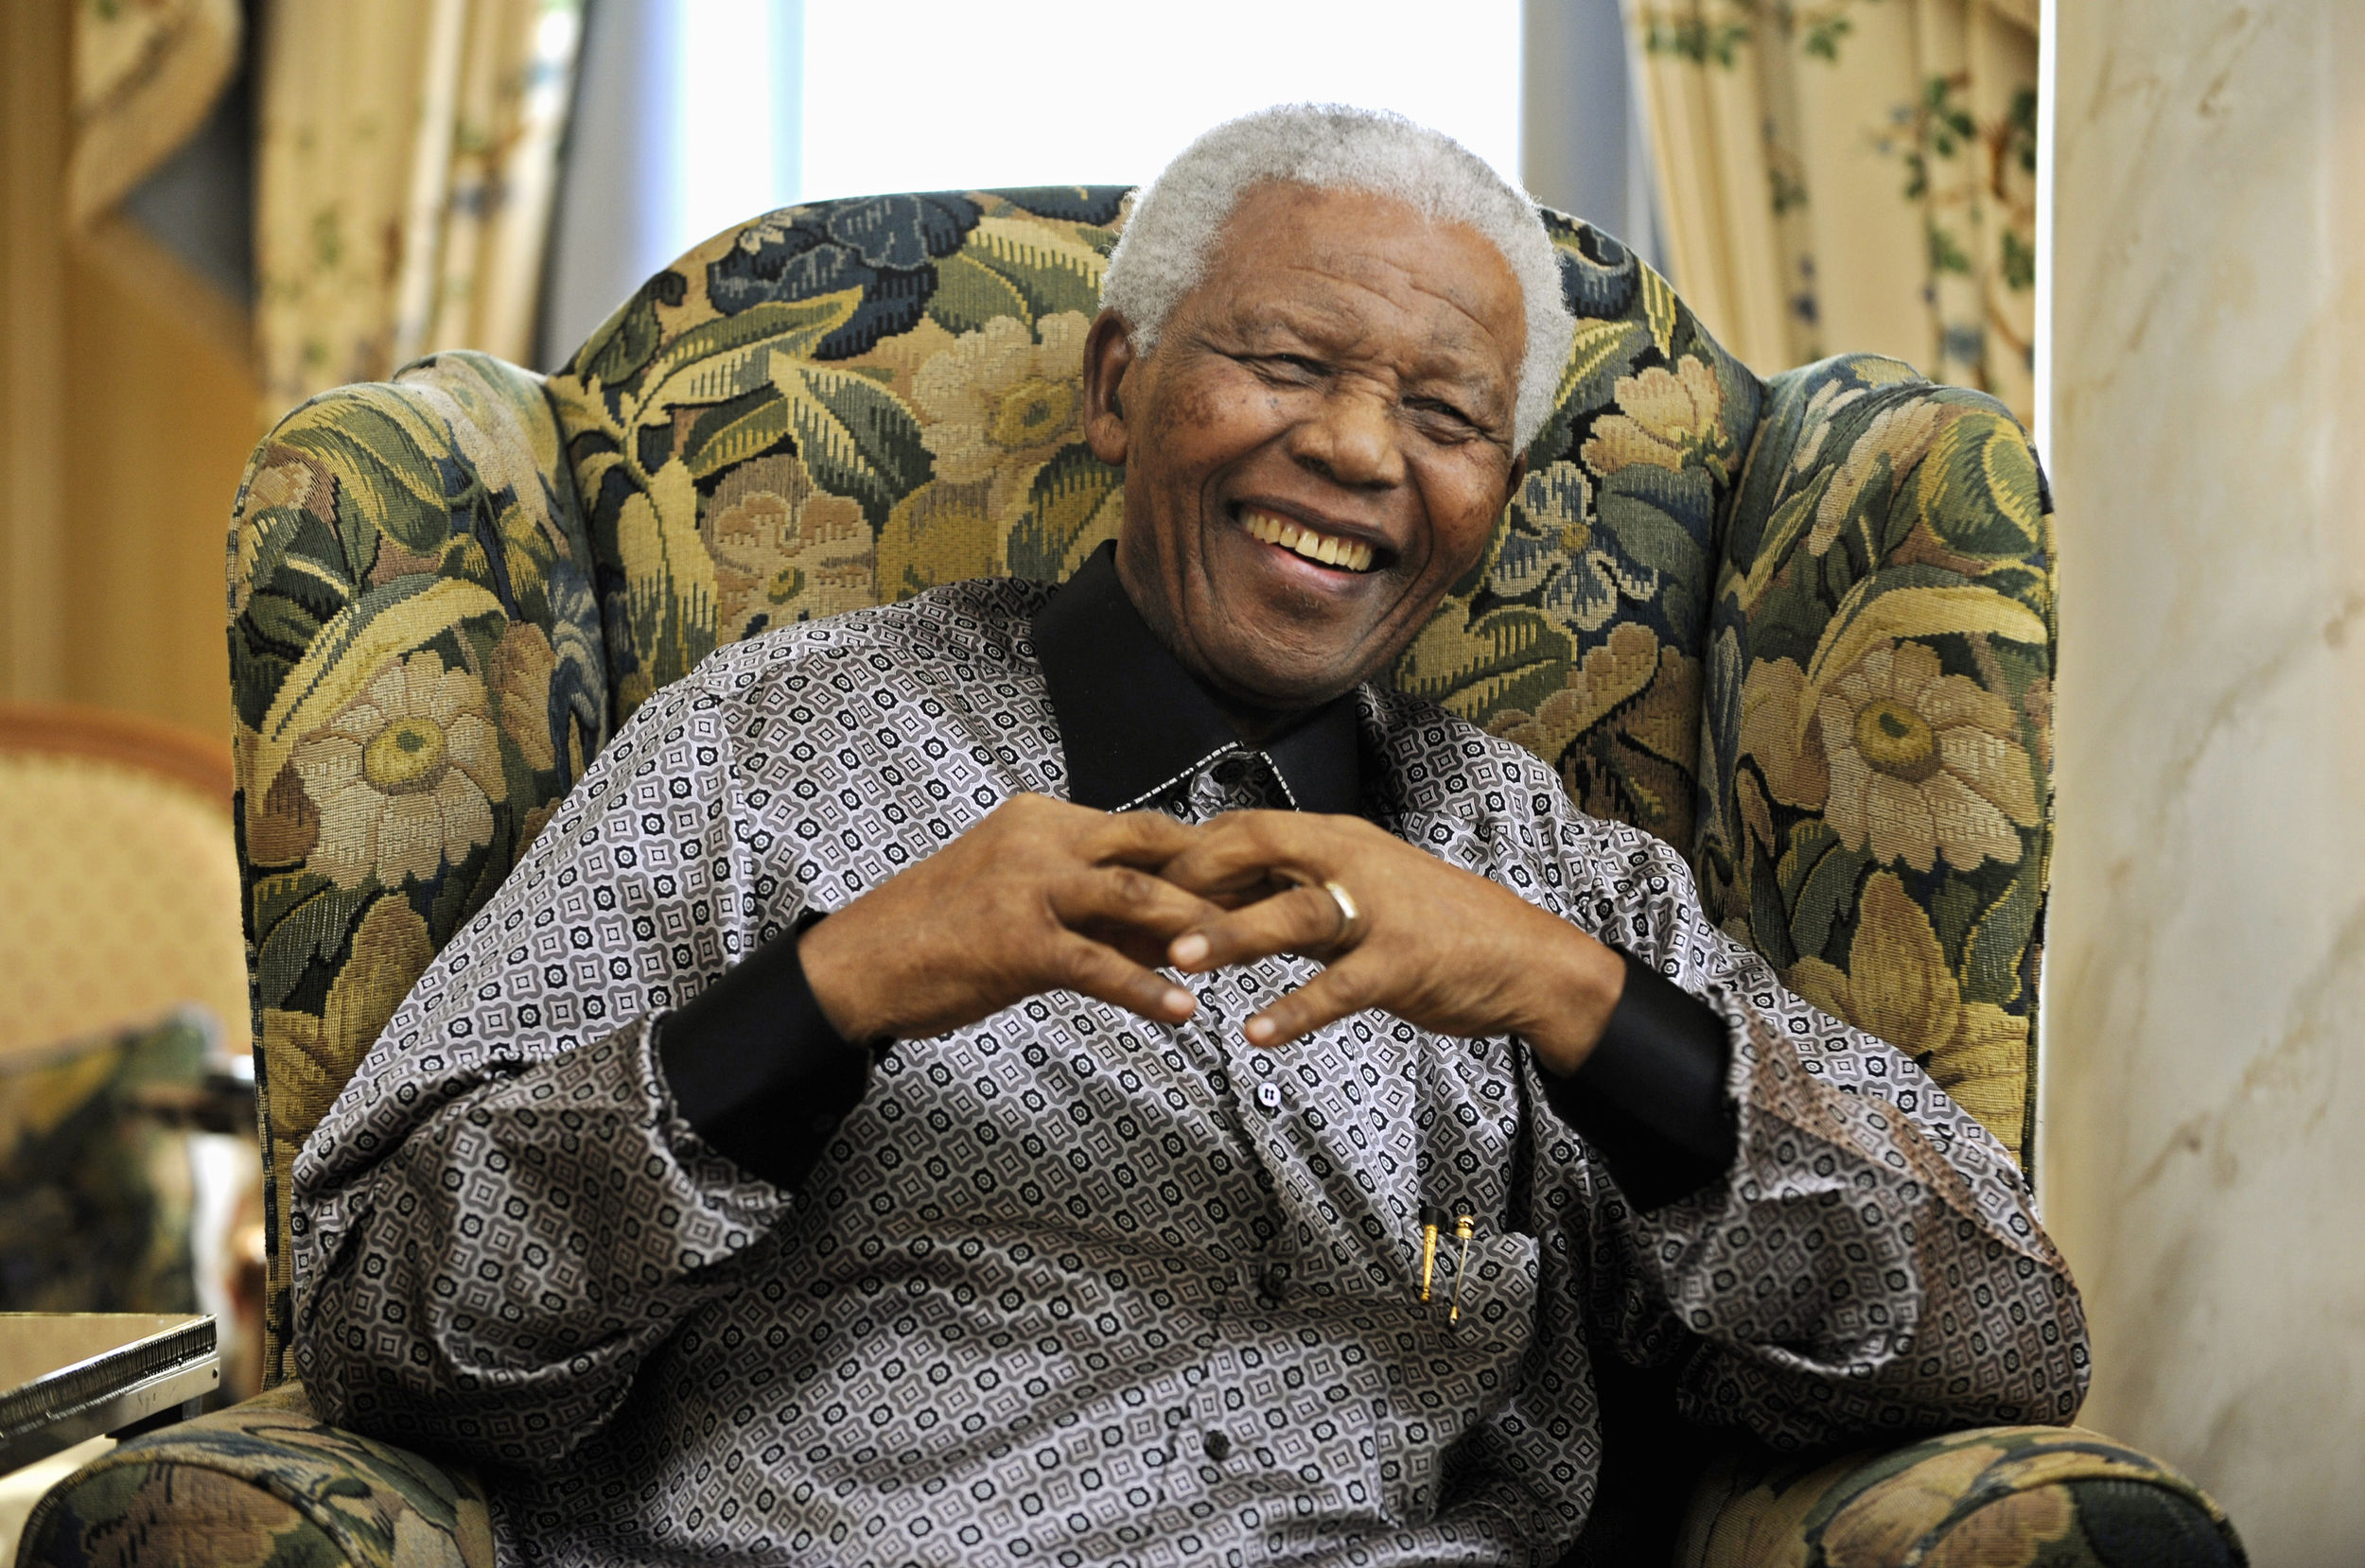 Nelson Mandela is pictured at his hotel in central London on June 24 2008. Mandela arrived in Britain ahead of a 90th birthday concert in his honour in London's Hyde Park.